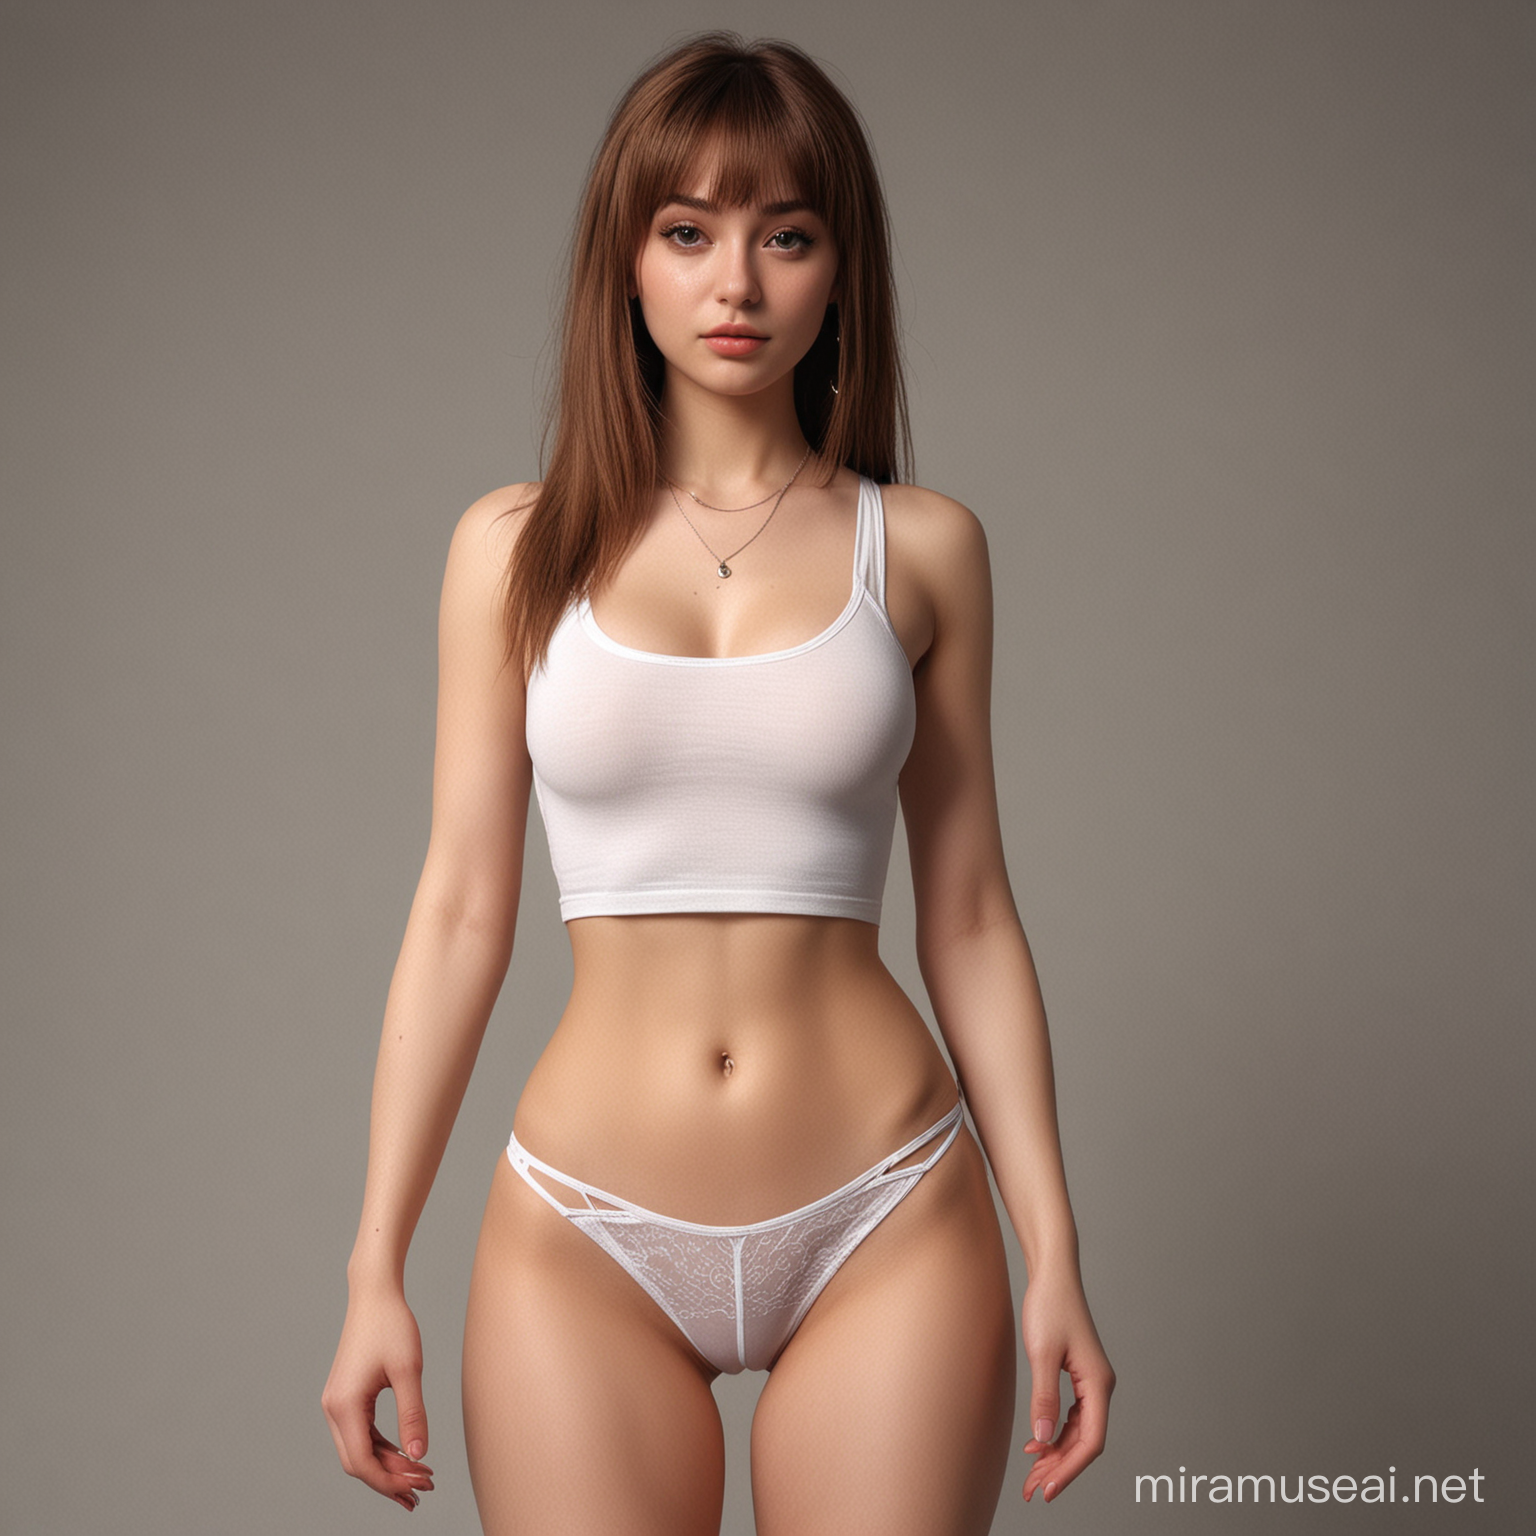 make a complete body pic, sexy and charming model, no erorrors, no duplicate. e-girl, style, ghotic thot oufit, thong, hot, stable, no blur. full body, hd, stablediffusion, high resolution, the girl has a face whit a bangs hair cut, no deformations, 8k, gorgeous outfit, definited face, proportions, charming vibes, real hair, no low definition, no imperfections, realistic body and face, piercing, sultry, tart, lass, real skin texture, full body, gorgeous dettails, cute crop top, proportions, aesthetic outfit, e-girl style makup, definted acessory, no deformations, realistic proportions, no deformed acessory, no low quality acessory, realistic hair, full body, beautyful, realistic locations background, realistic girl, realistic fabric, cameltoe, realistic,  dont hide dettails, realistic body, realistic proportions, definited body parts, pretty face